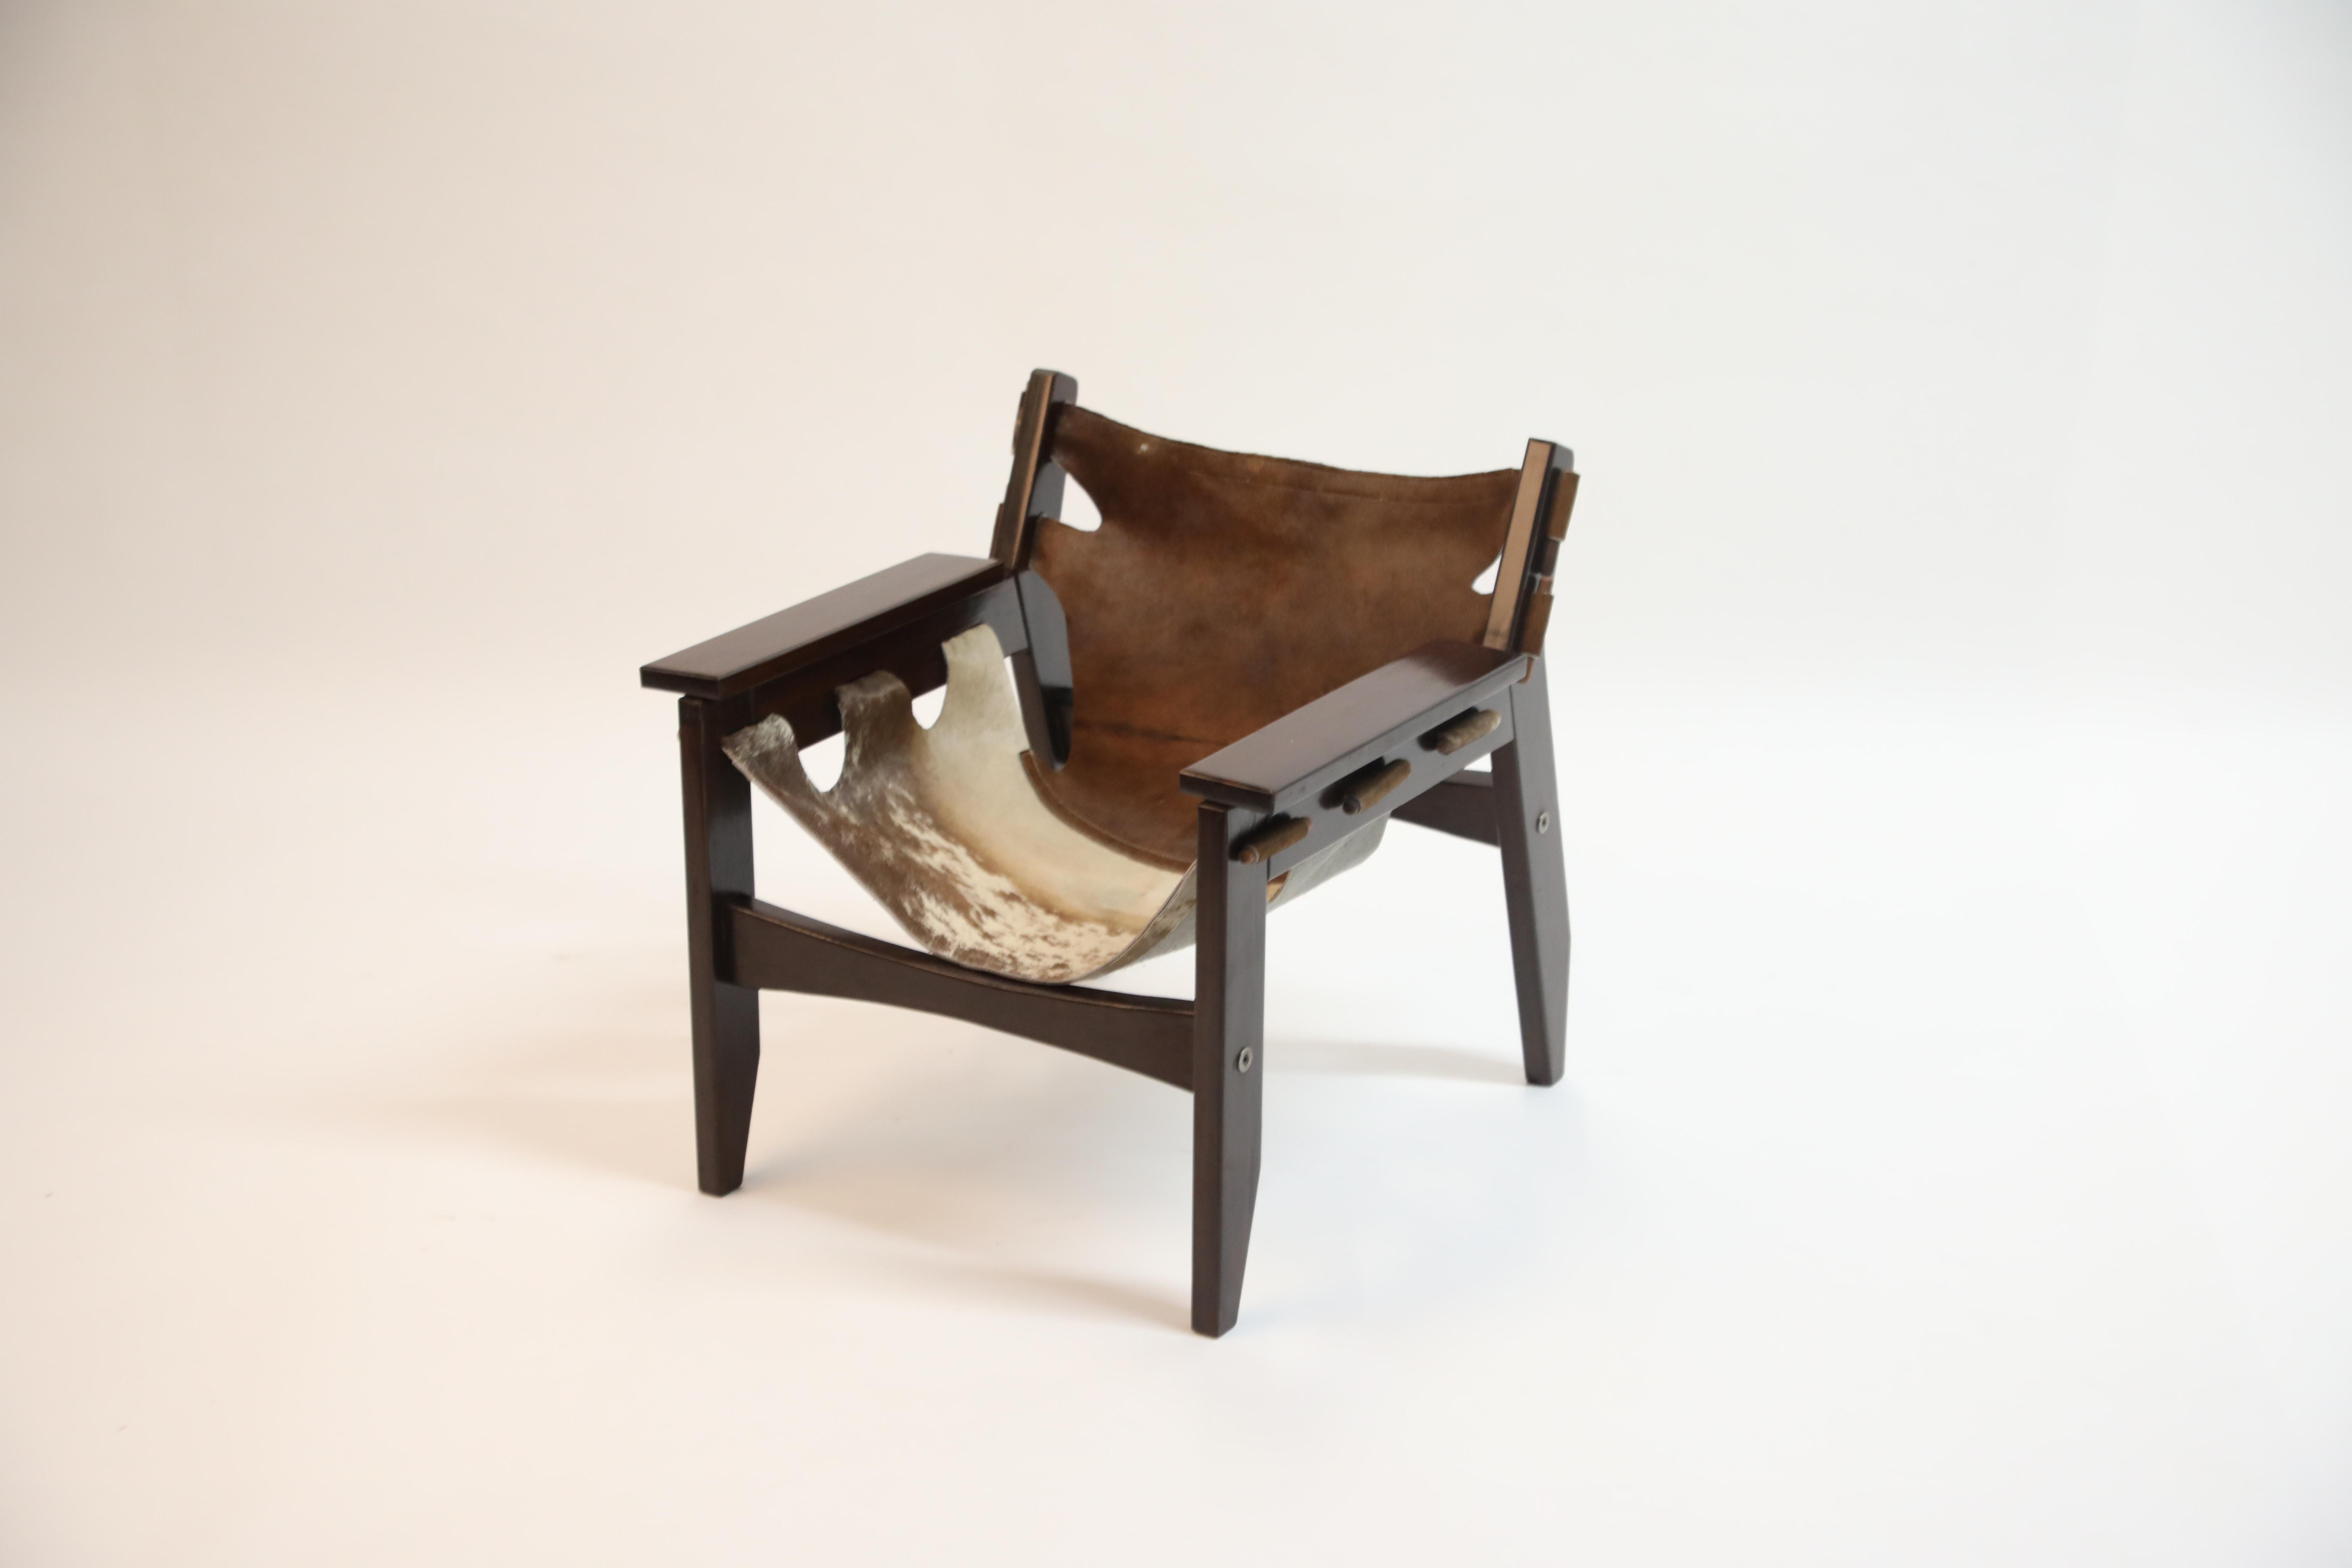 A charming and wonderful example of the 'Kilin' lounge chair by famed Brazilian modern designer Sergio Rodrigues for Oca in 1970s Brazil. Frame is a succulent Brazilian Rosewood and the leather slings are hair-on cowhide. 

This easy chair just